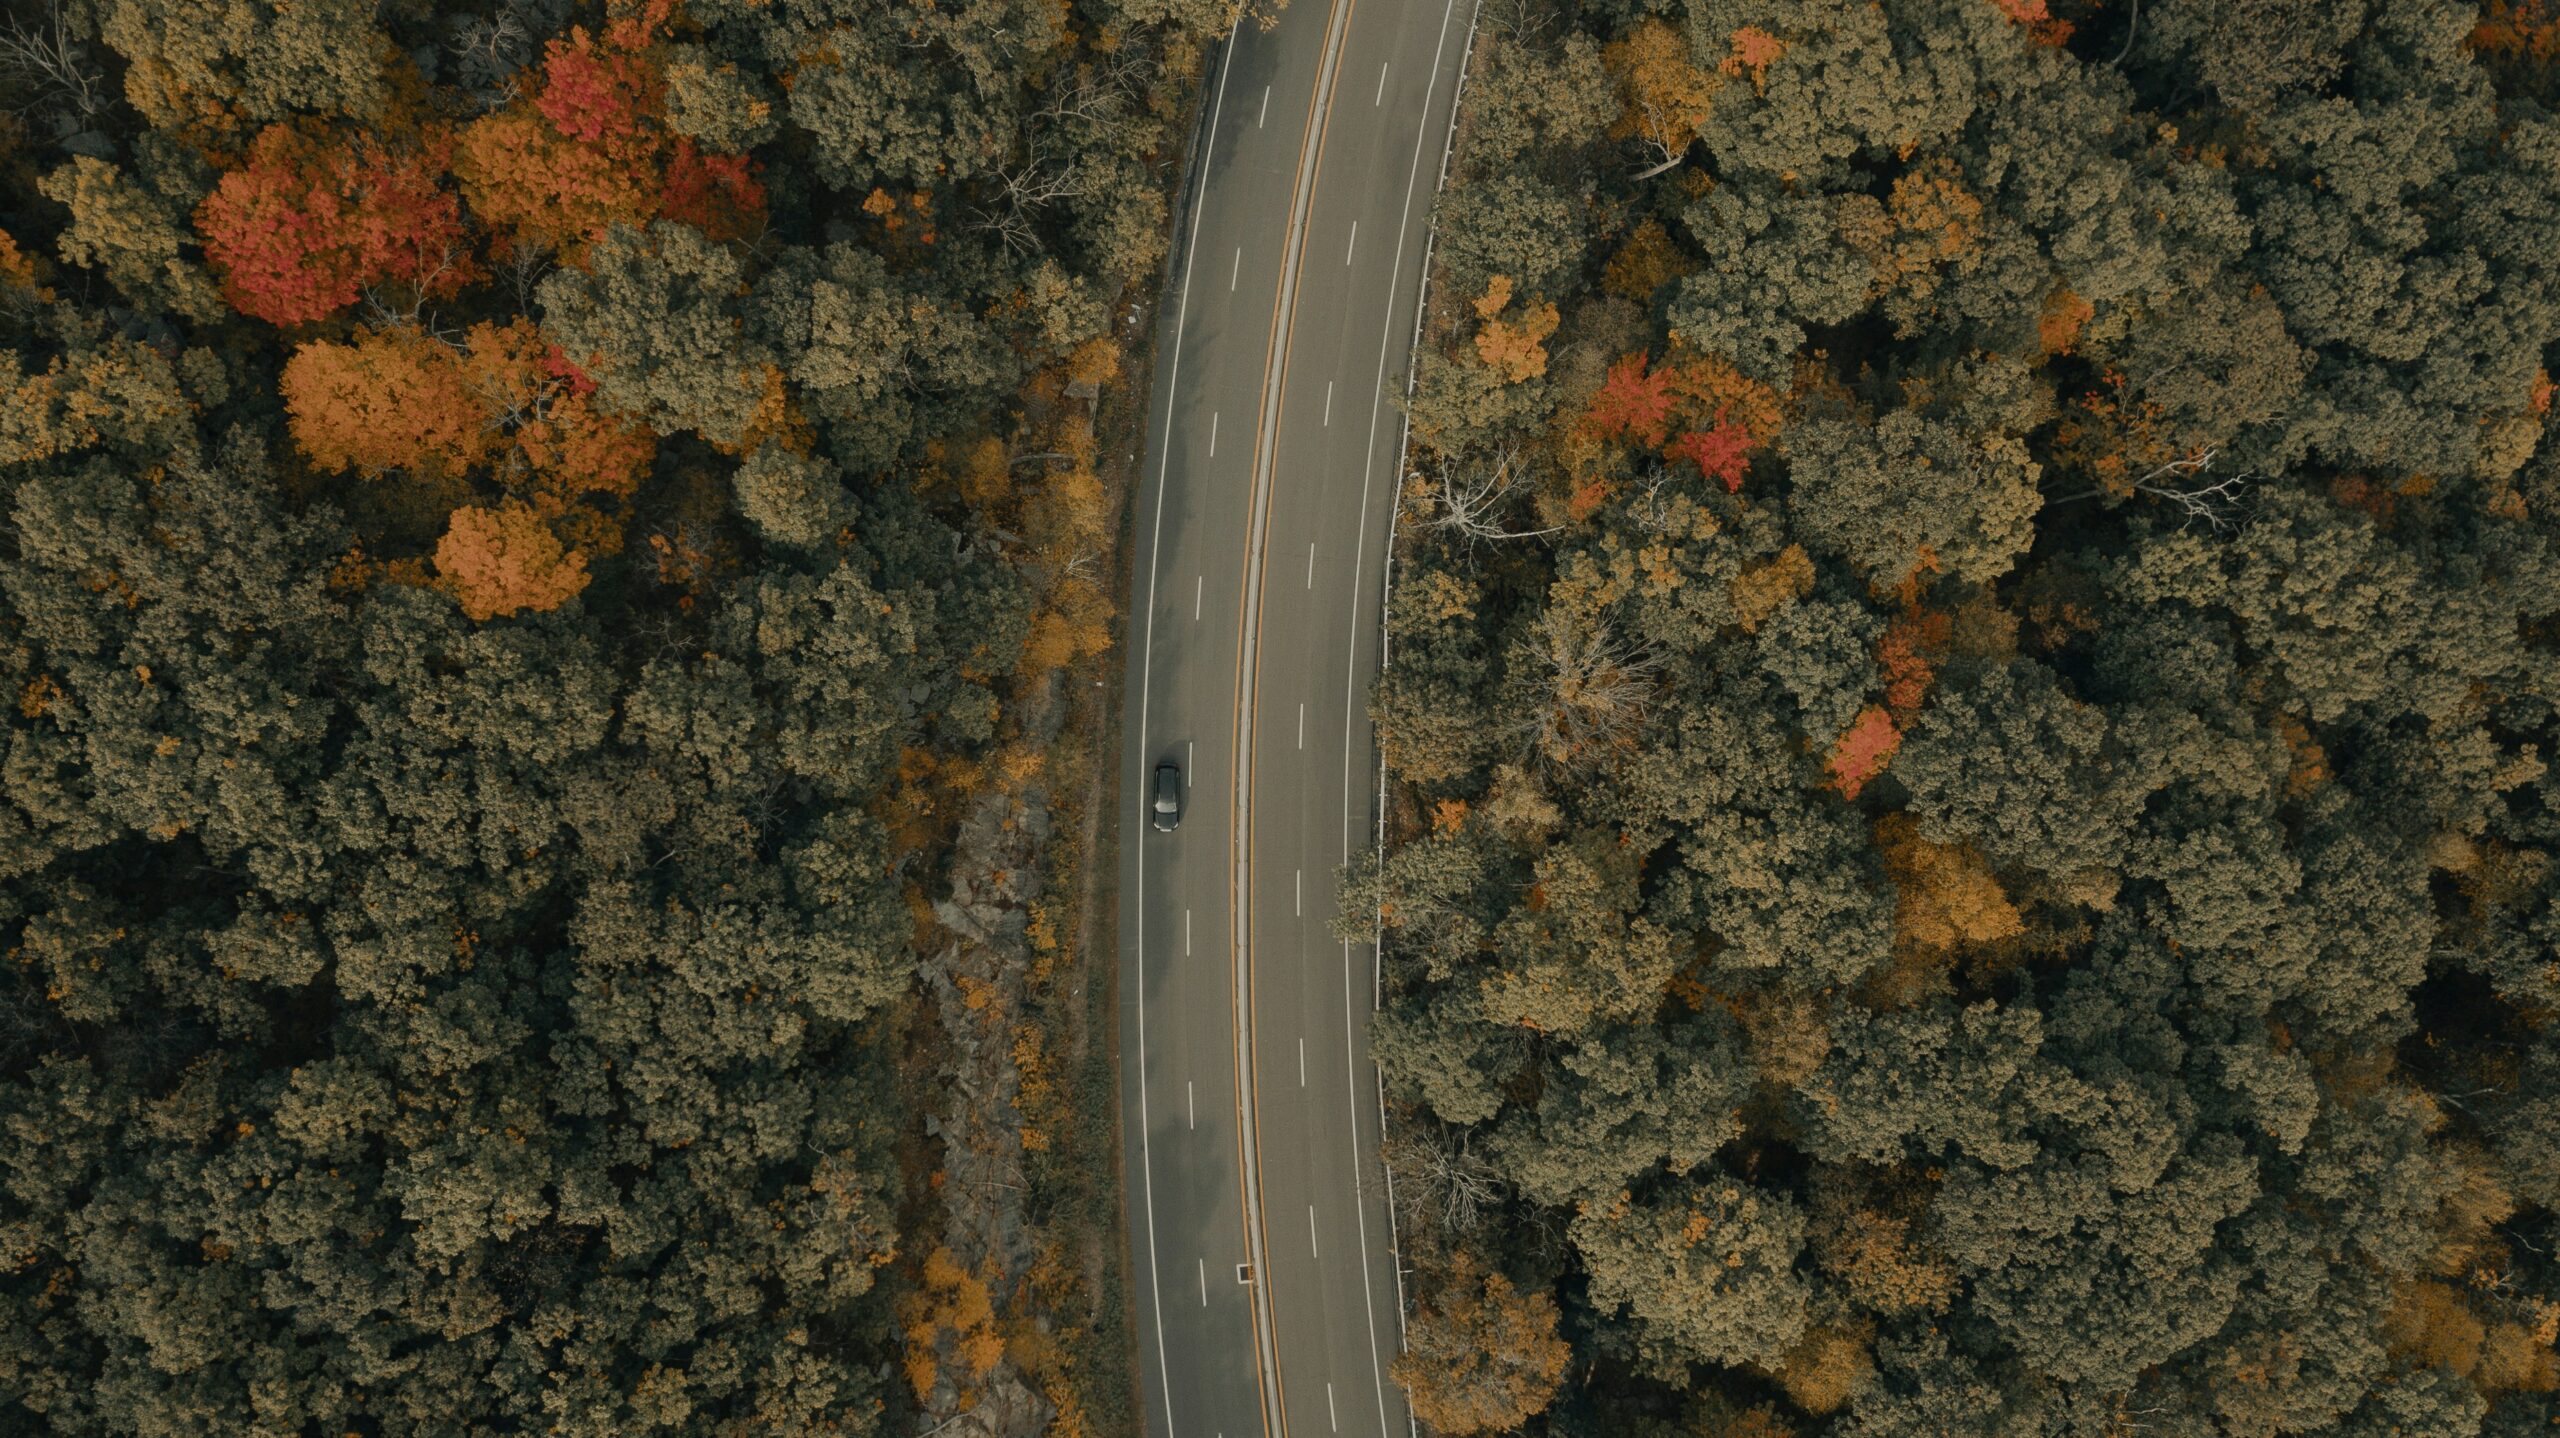 These 25 road trip questions will give couples insight into travel compatibility. 
pictured: an aerial view of a long road surrounded by a forest with autumn leaves and a single car 